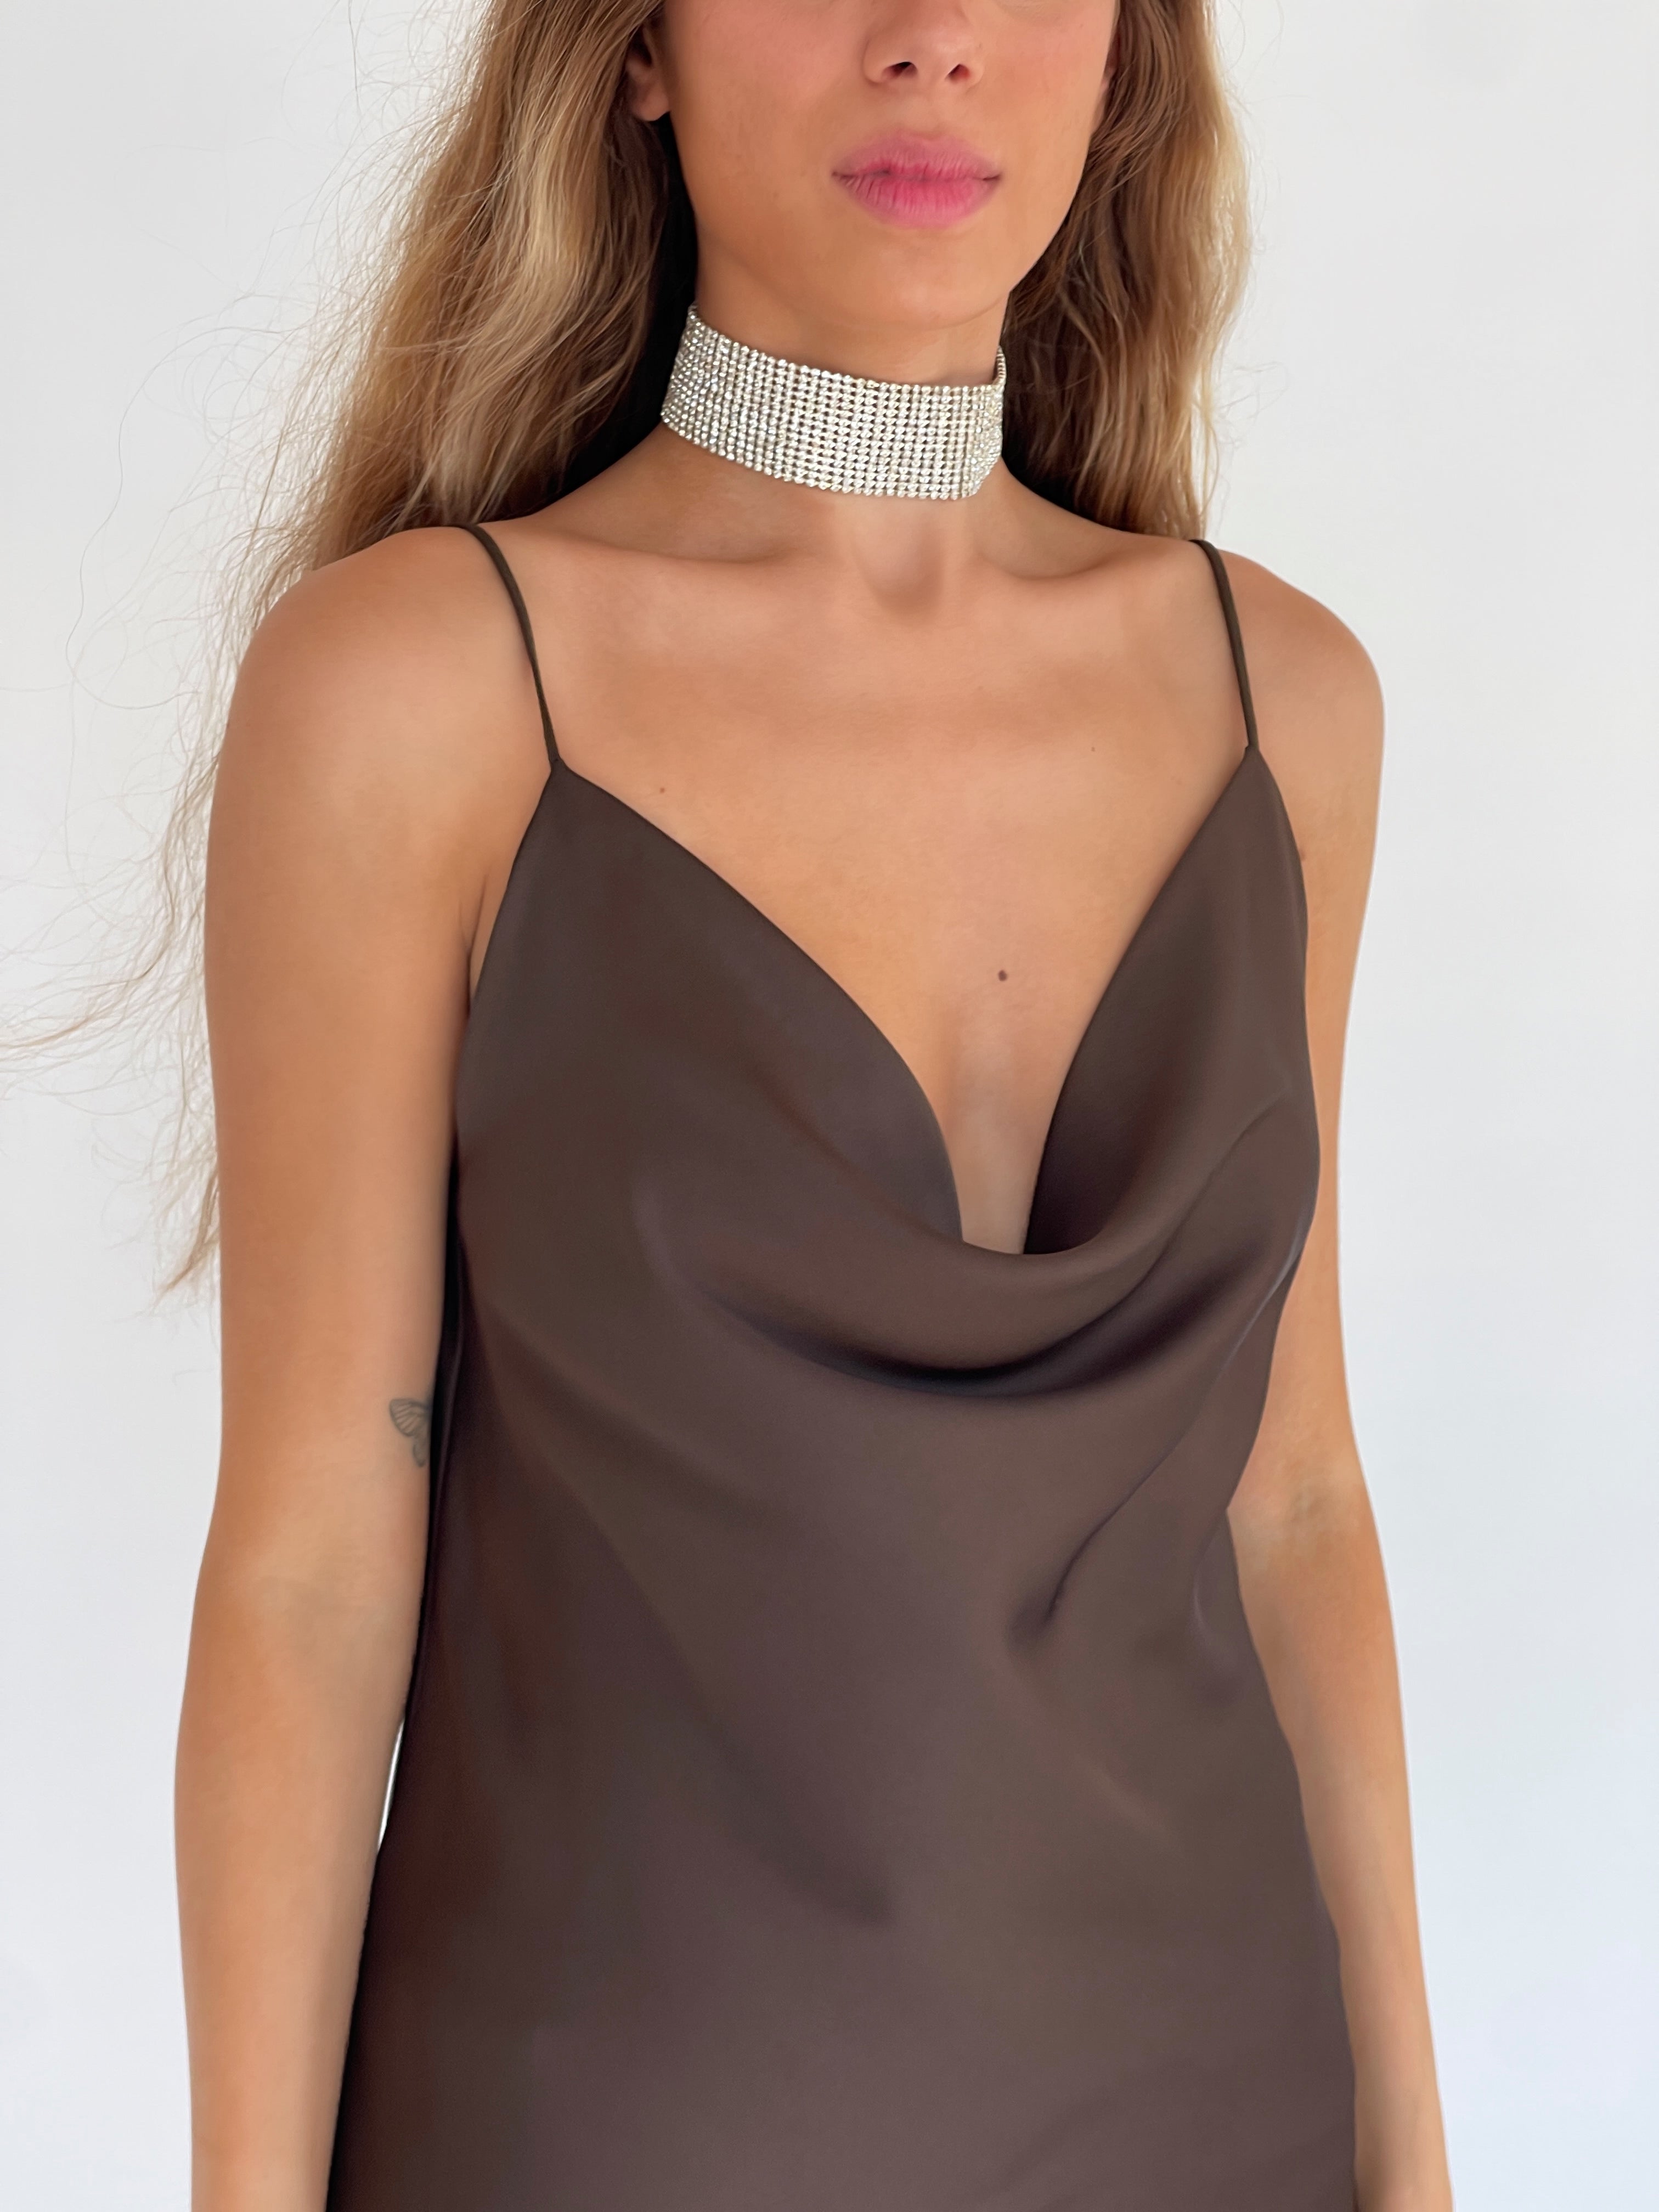 CAMI TOP WITH COWL NECK IN BROWN